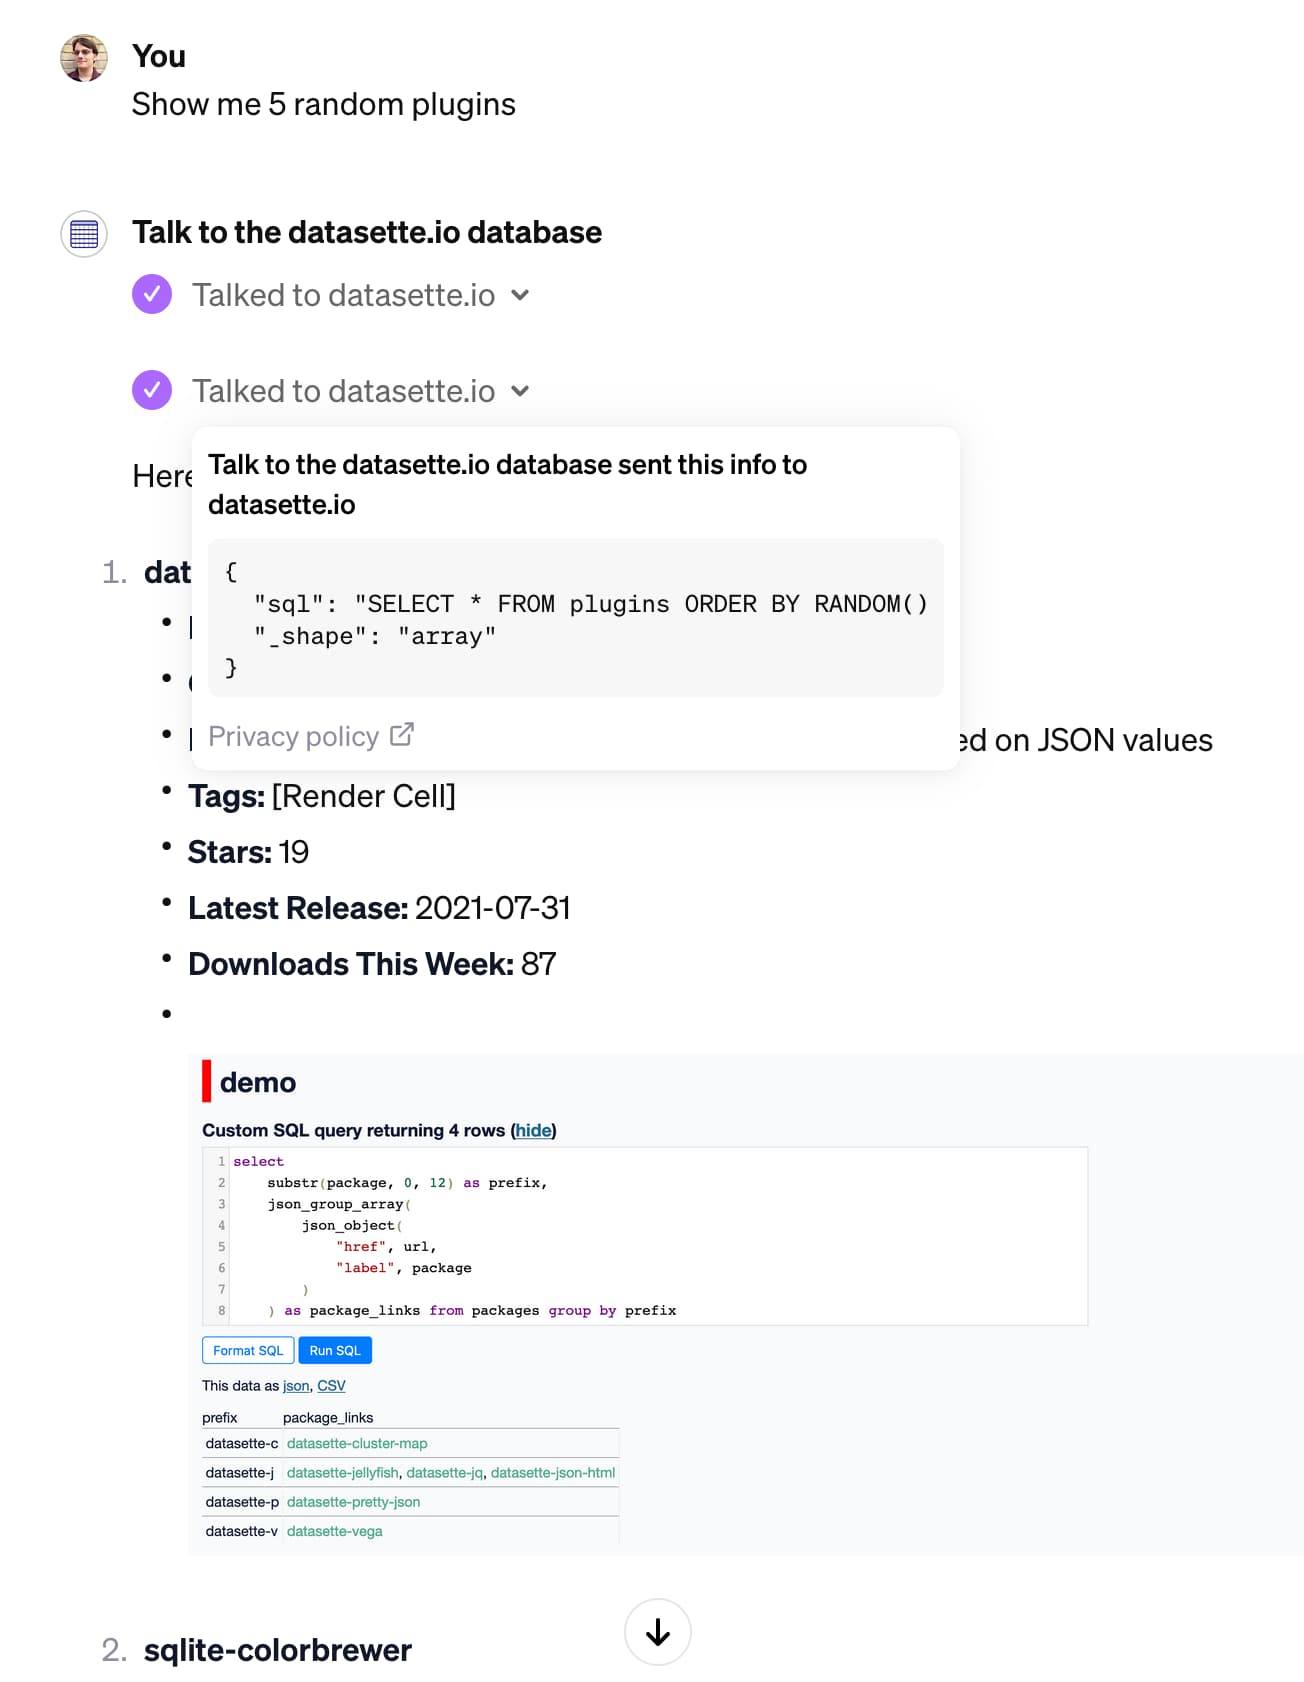 Talk to the datasette.io database: Talked to datasette.io A popup shows the SQL query select * from plugins order by random() limit 5. Then it shows details of plugins, including an image and the number of downloads this week.